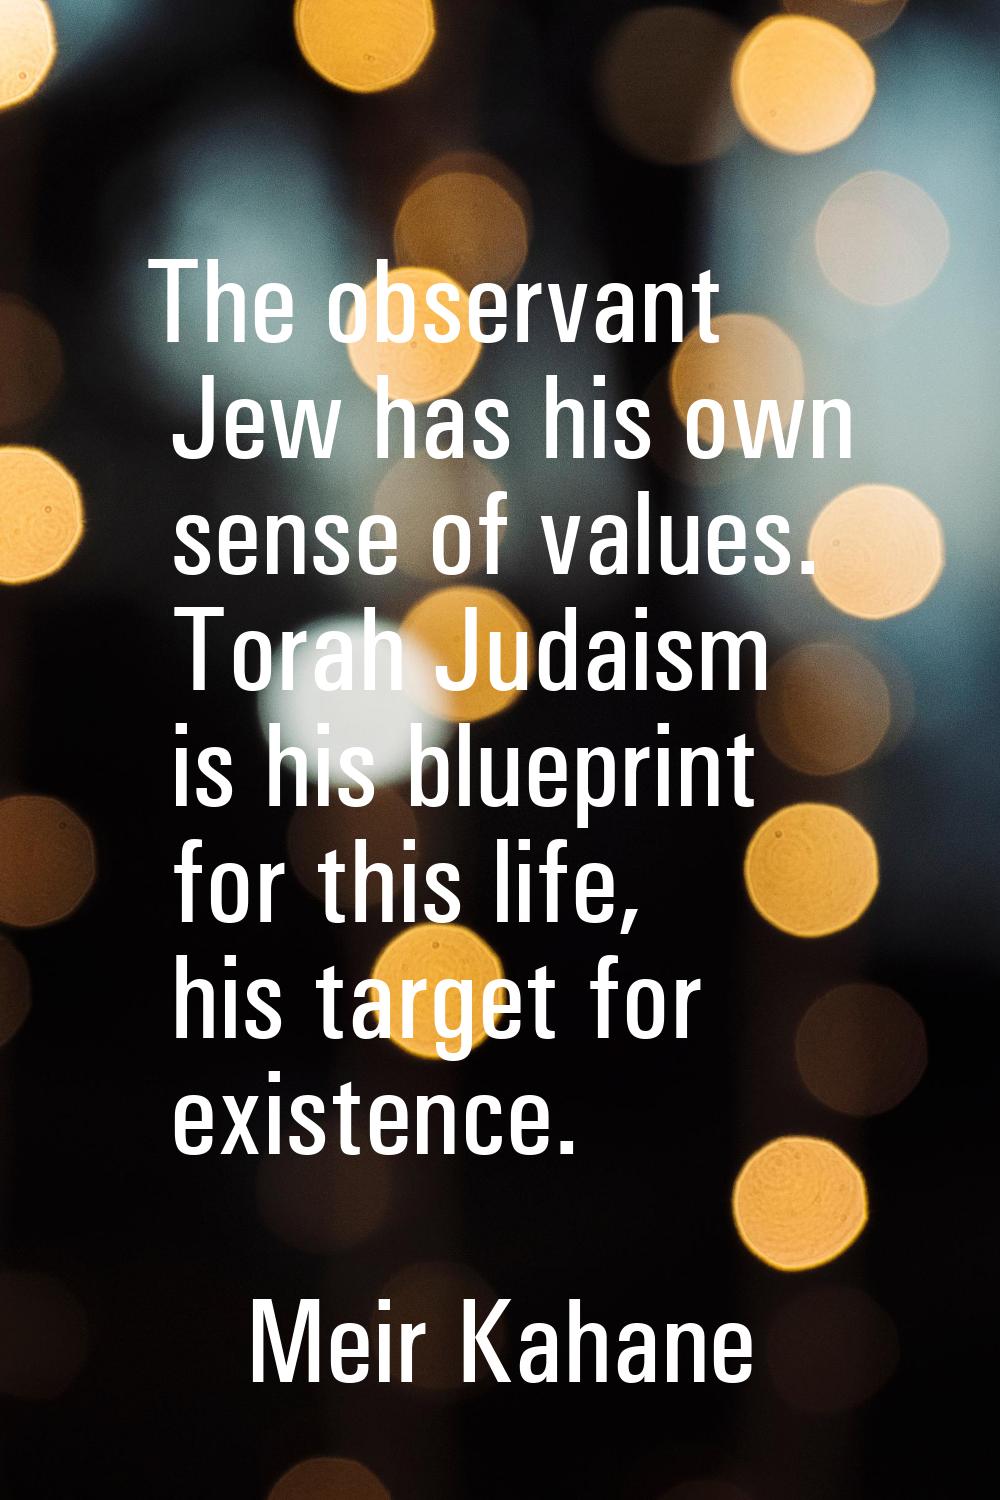 The observant Jew has his own sense of values. Torah Judaism is his blueprint for this life, his ta